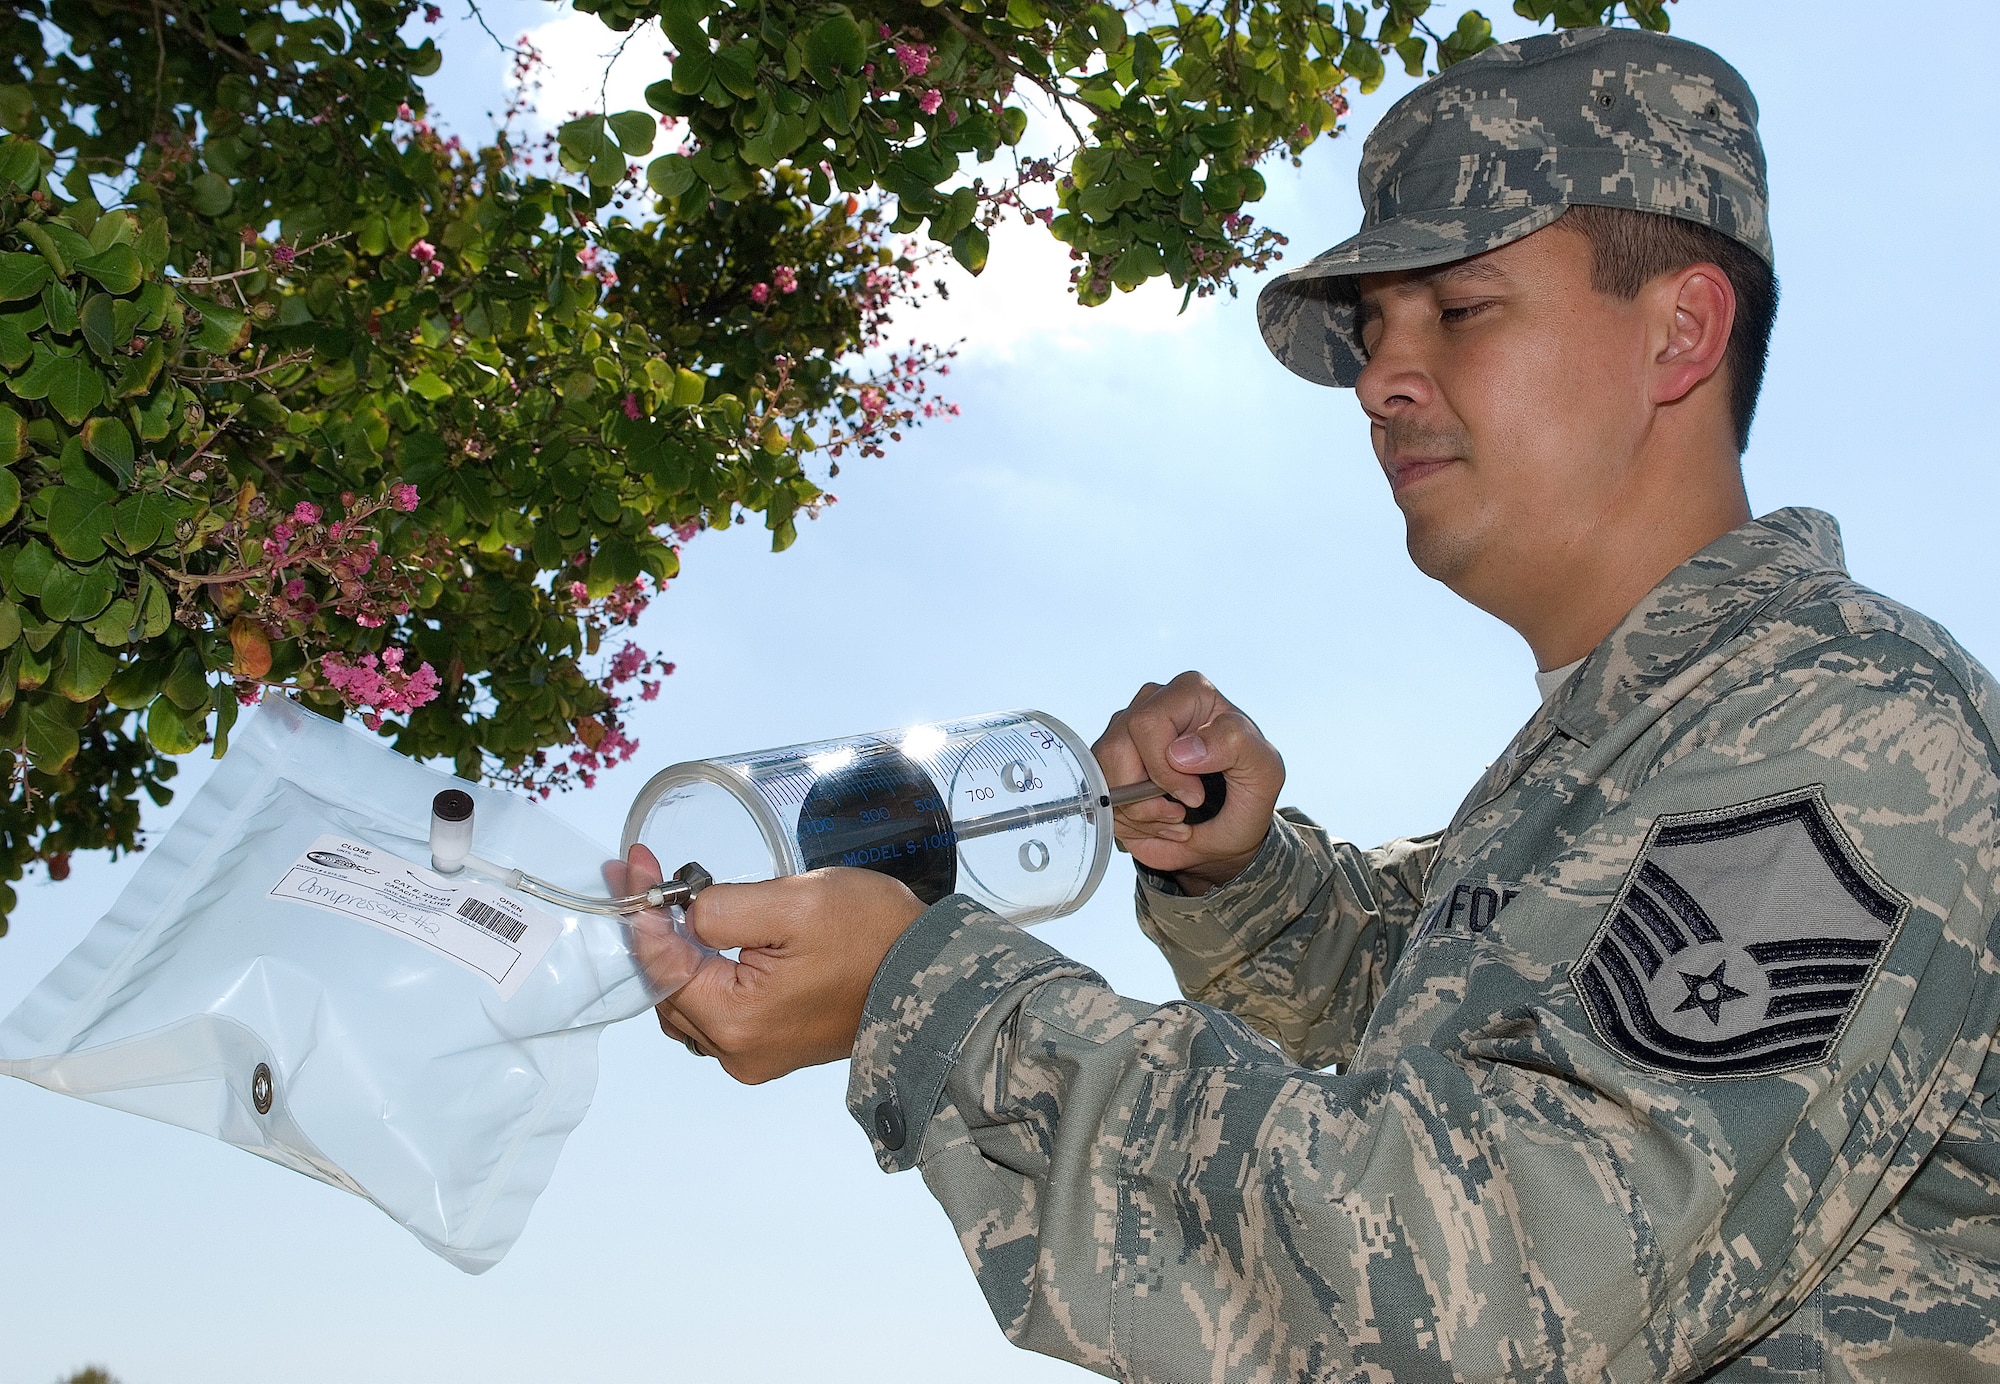 DOVER AIR FORCE BASE, Del. – Master Sgt. John Rinker, 436th Aerospace Medicine Squadron Bioenvironmental Engineering NCO in-charge, uses a syringe to fill an air sampling bag, which tightly seals in the air. The 436th AMDS BEEs collect samples of the air, water, soil and more around Dover AFB to detect and identify hazards around the base. (U.S. Air Force photo/Roland Balik) 